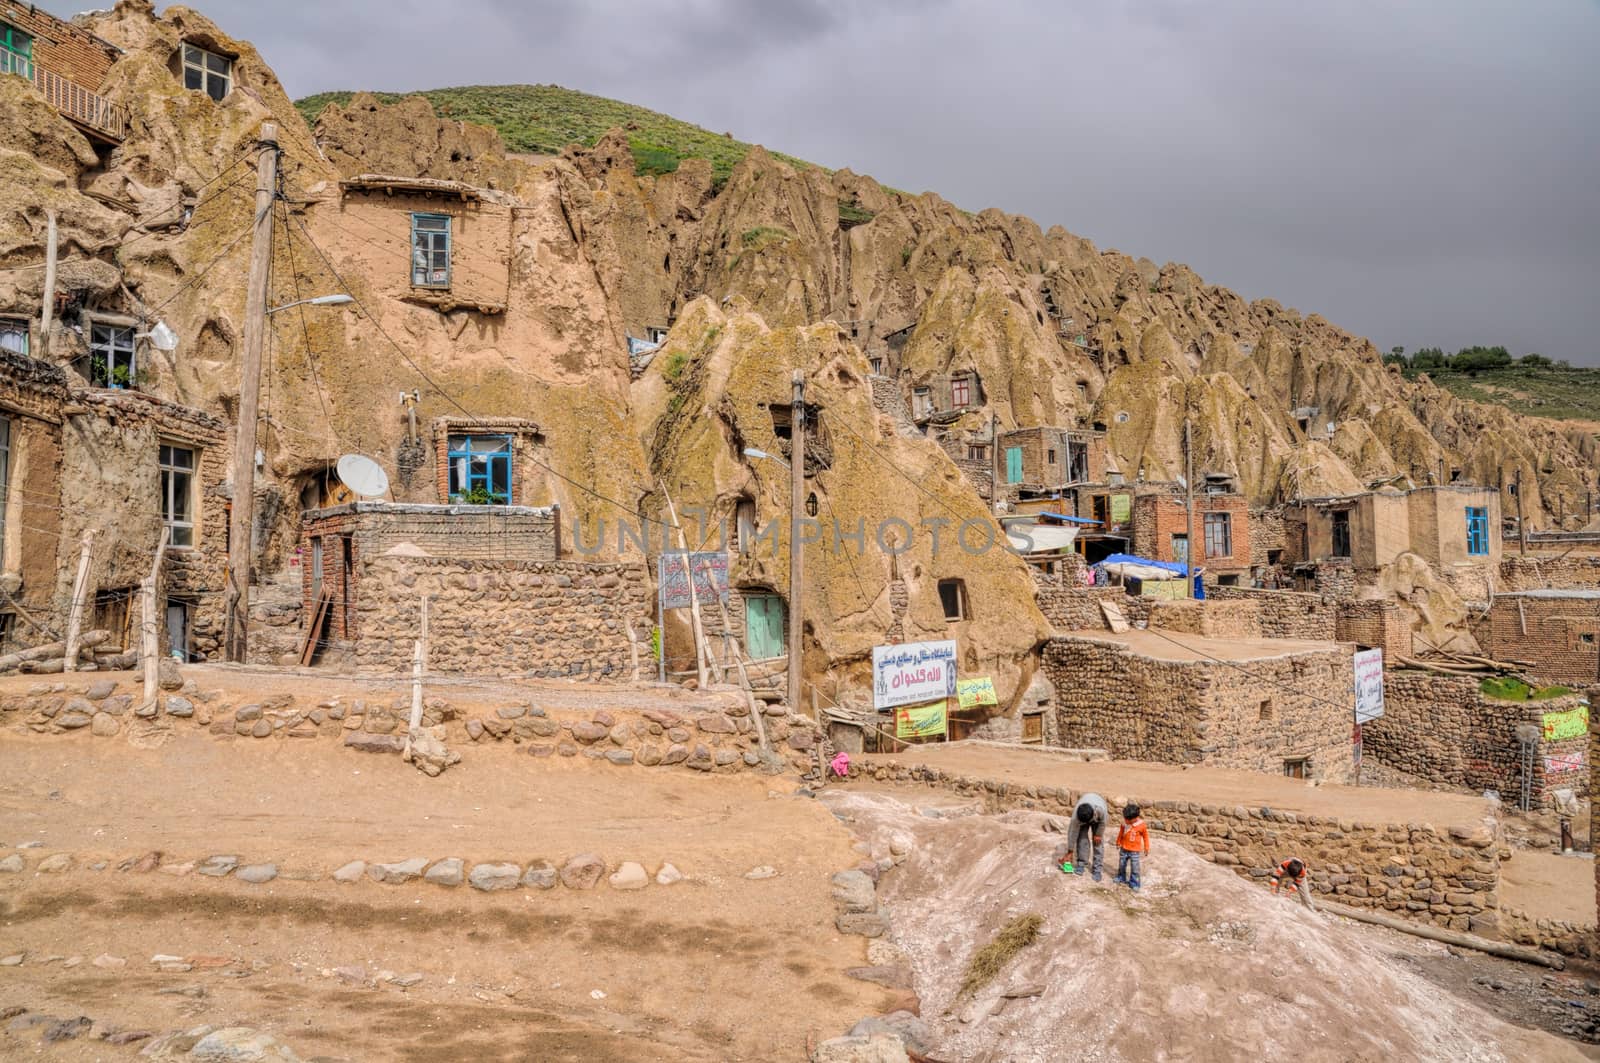 Scenic view of cone shaped dwellings in Kandovan village in Iran